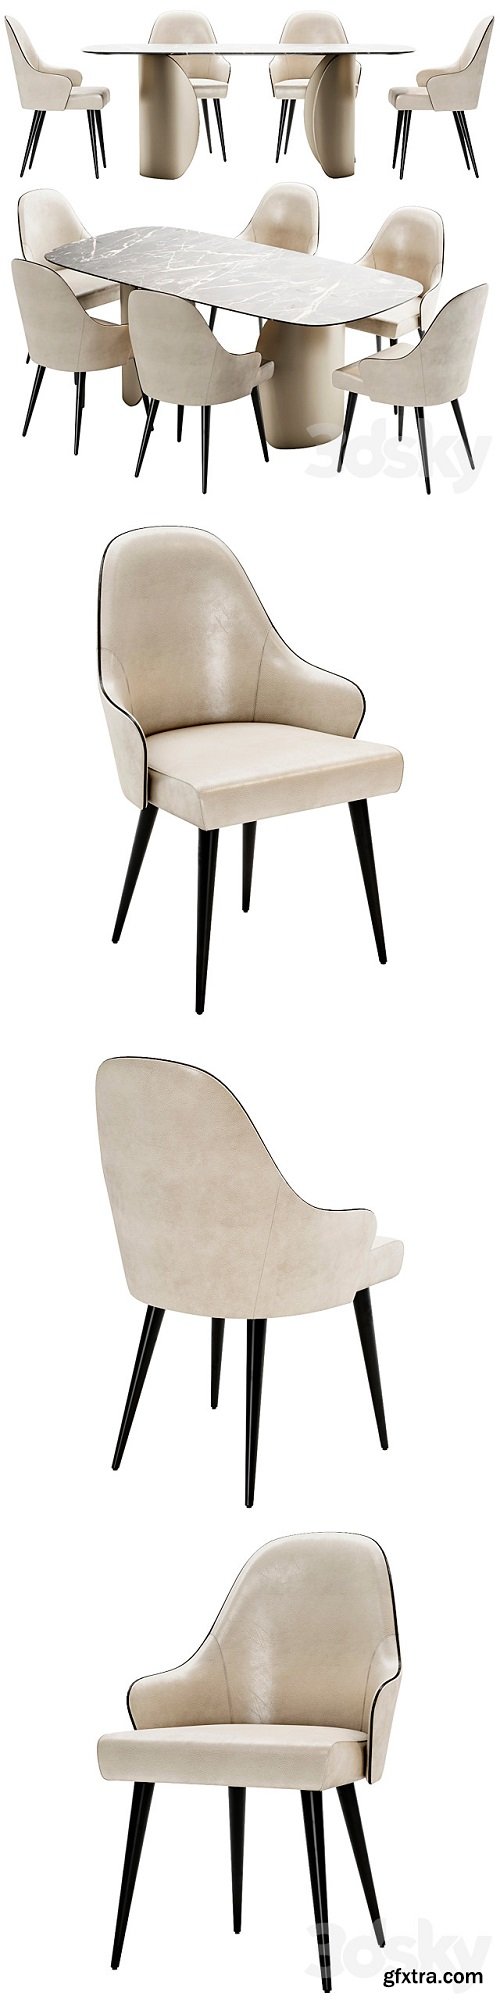 Ludwig chair and table Petalo 72 by Reflex